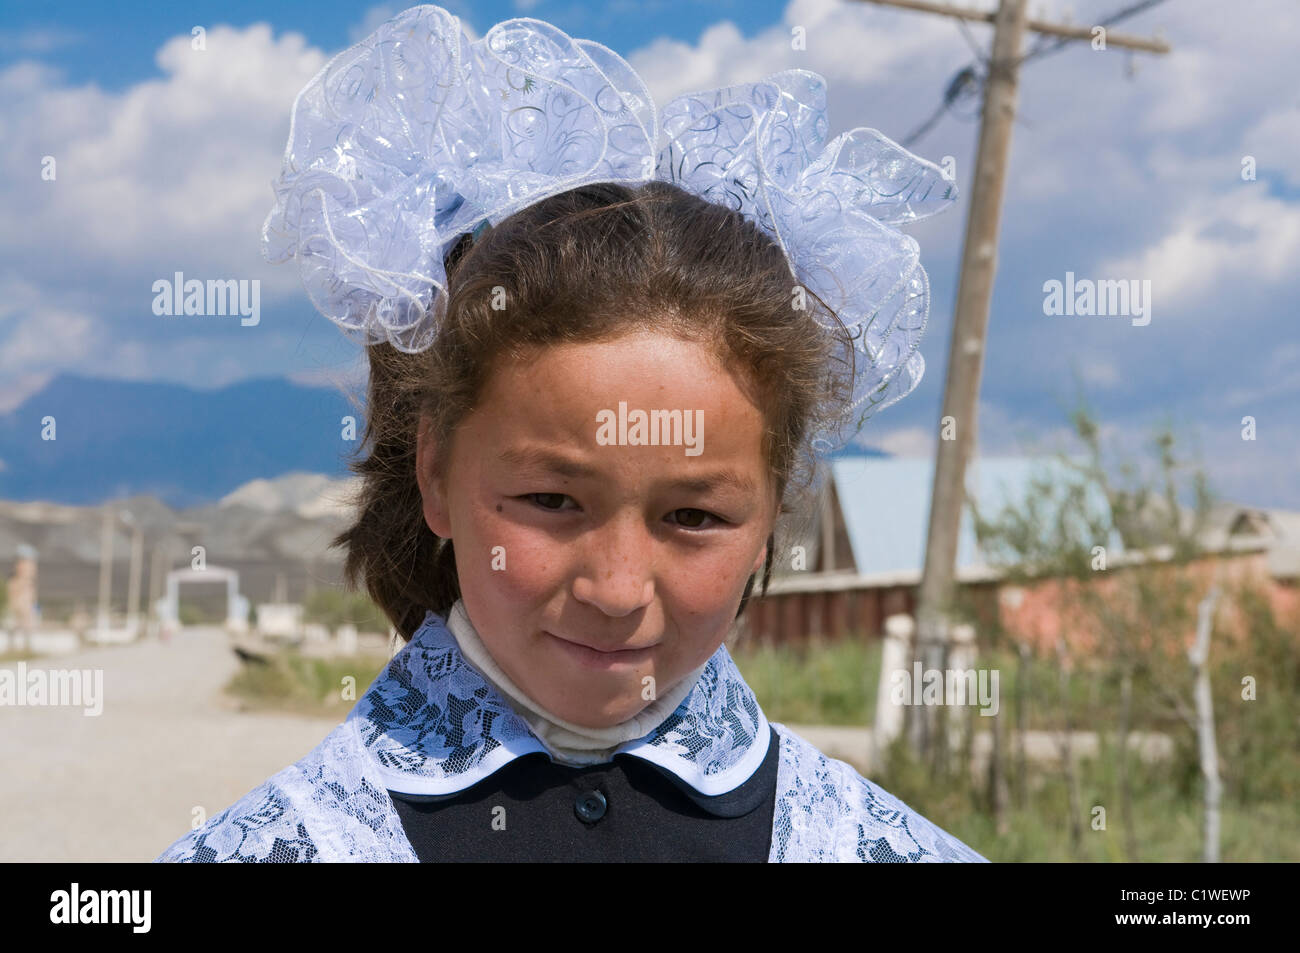 Kyrgyzstan, Tien Shan Mountains, Torugart Pass, Portrait of girl in traditional outfit Stock Photo